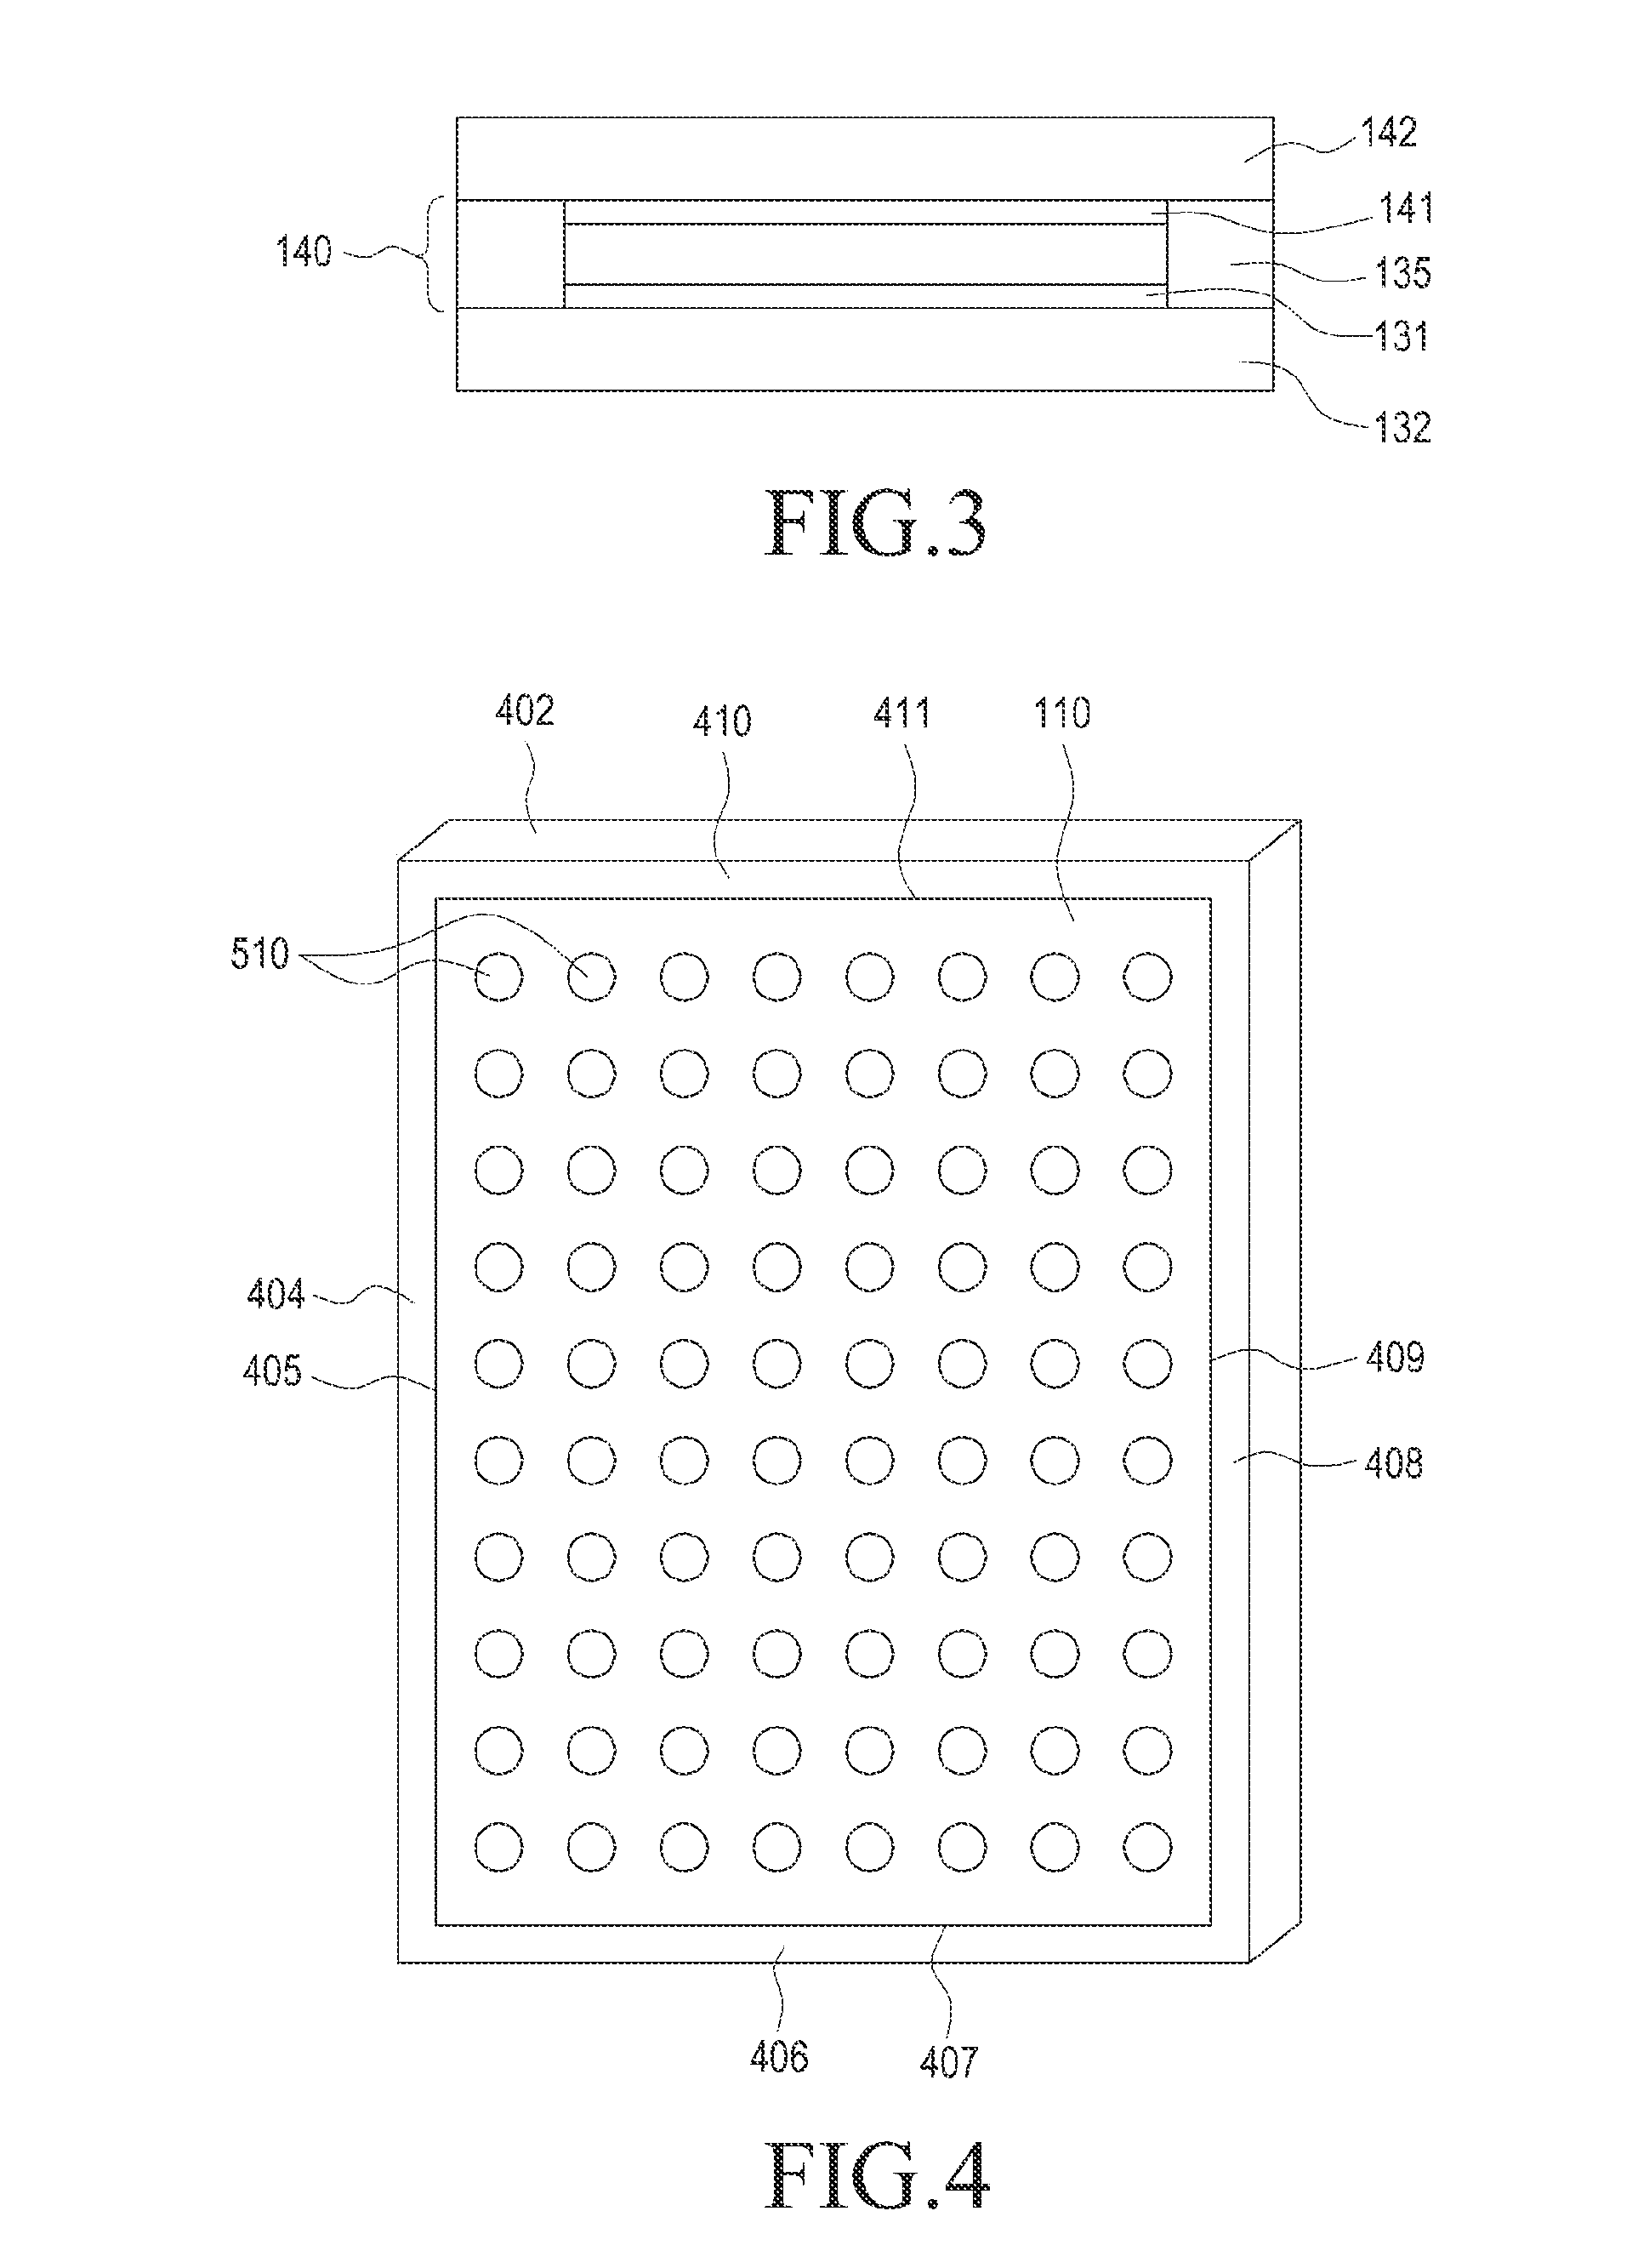 Apparatus and method for improving input position and pressure detection in a pressure detection touch screen